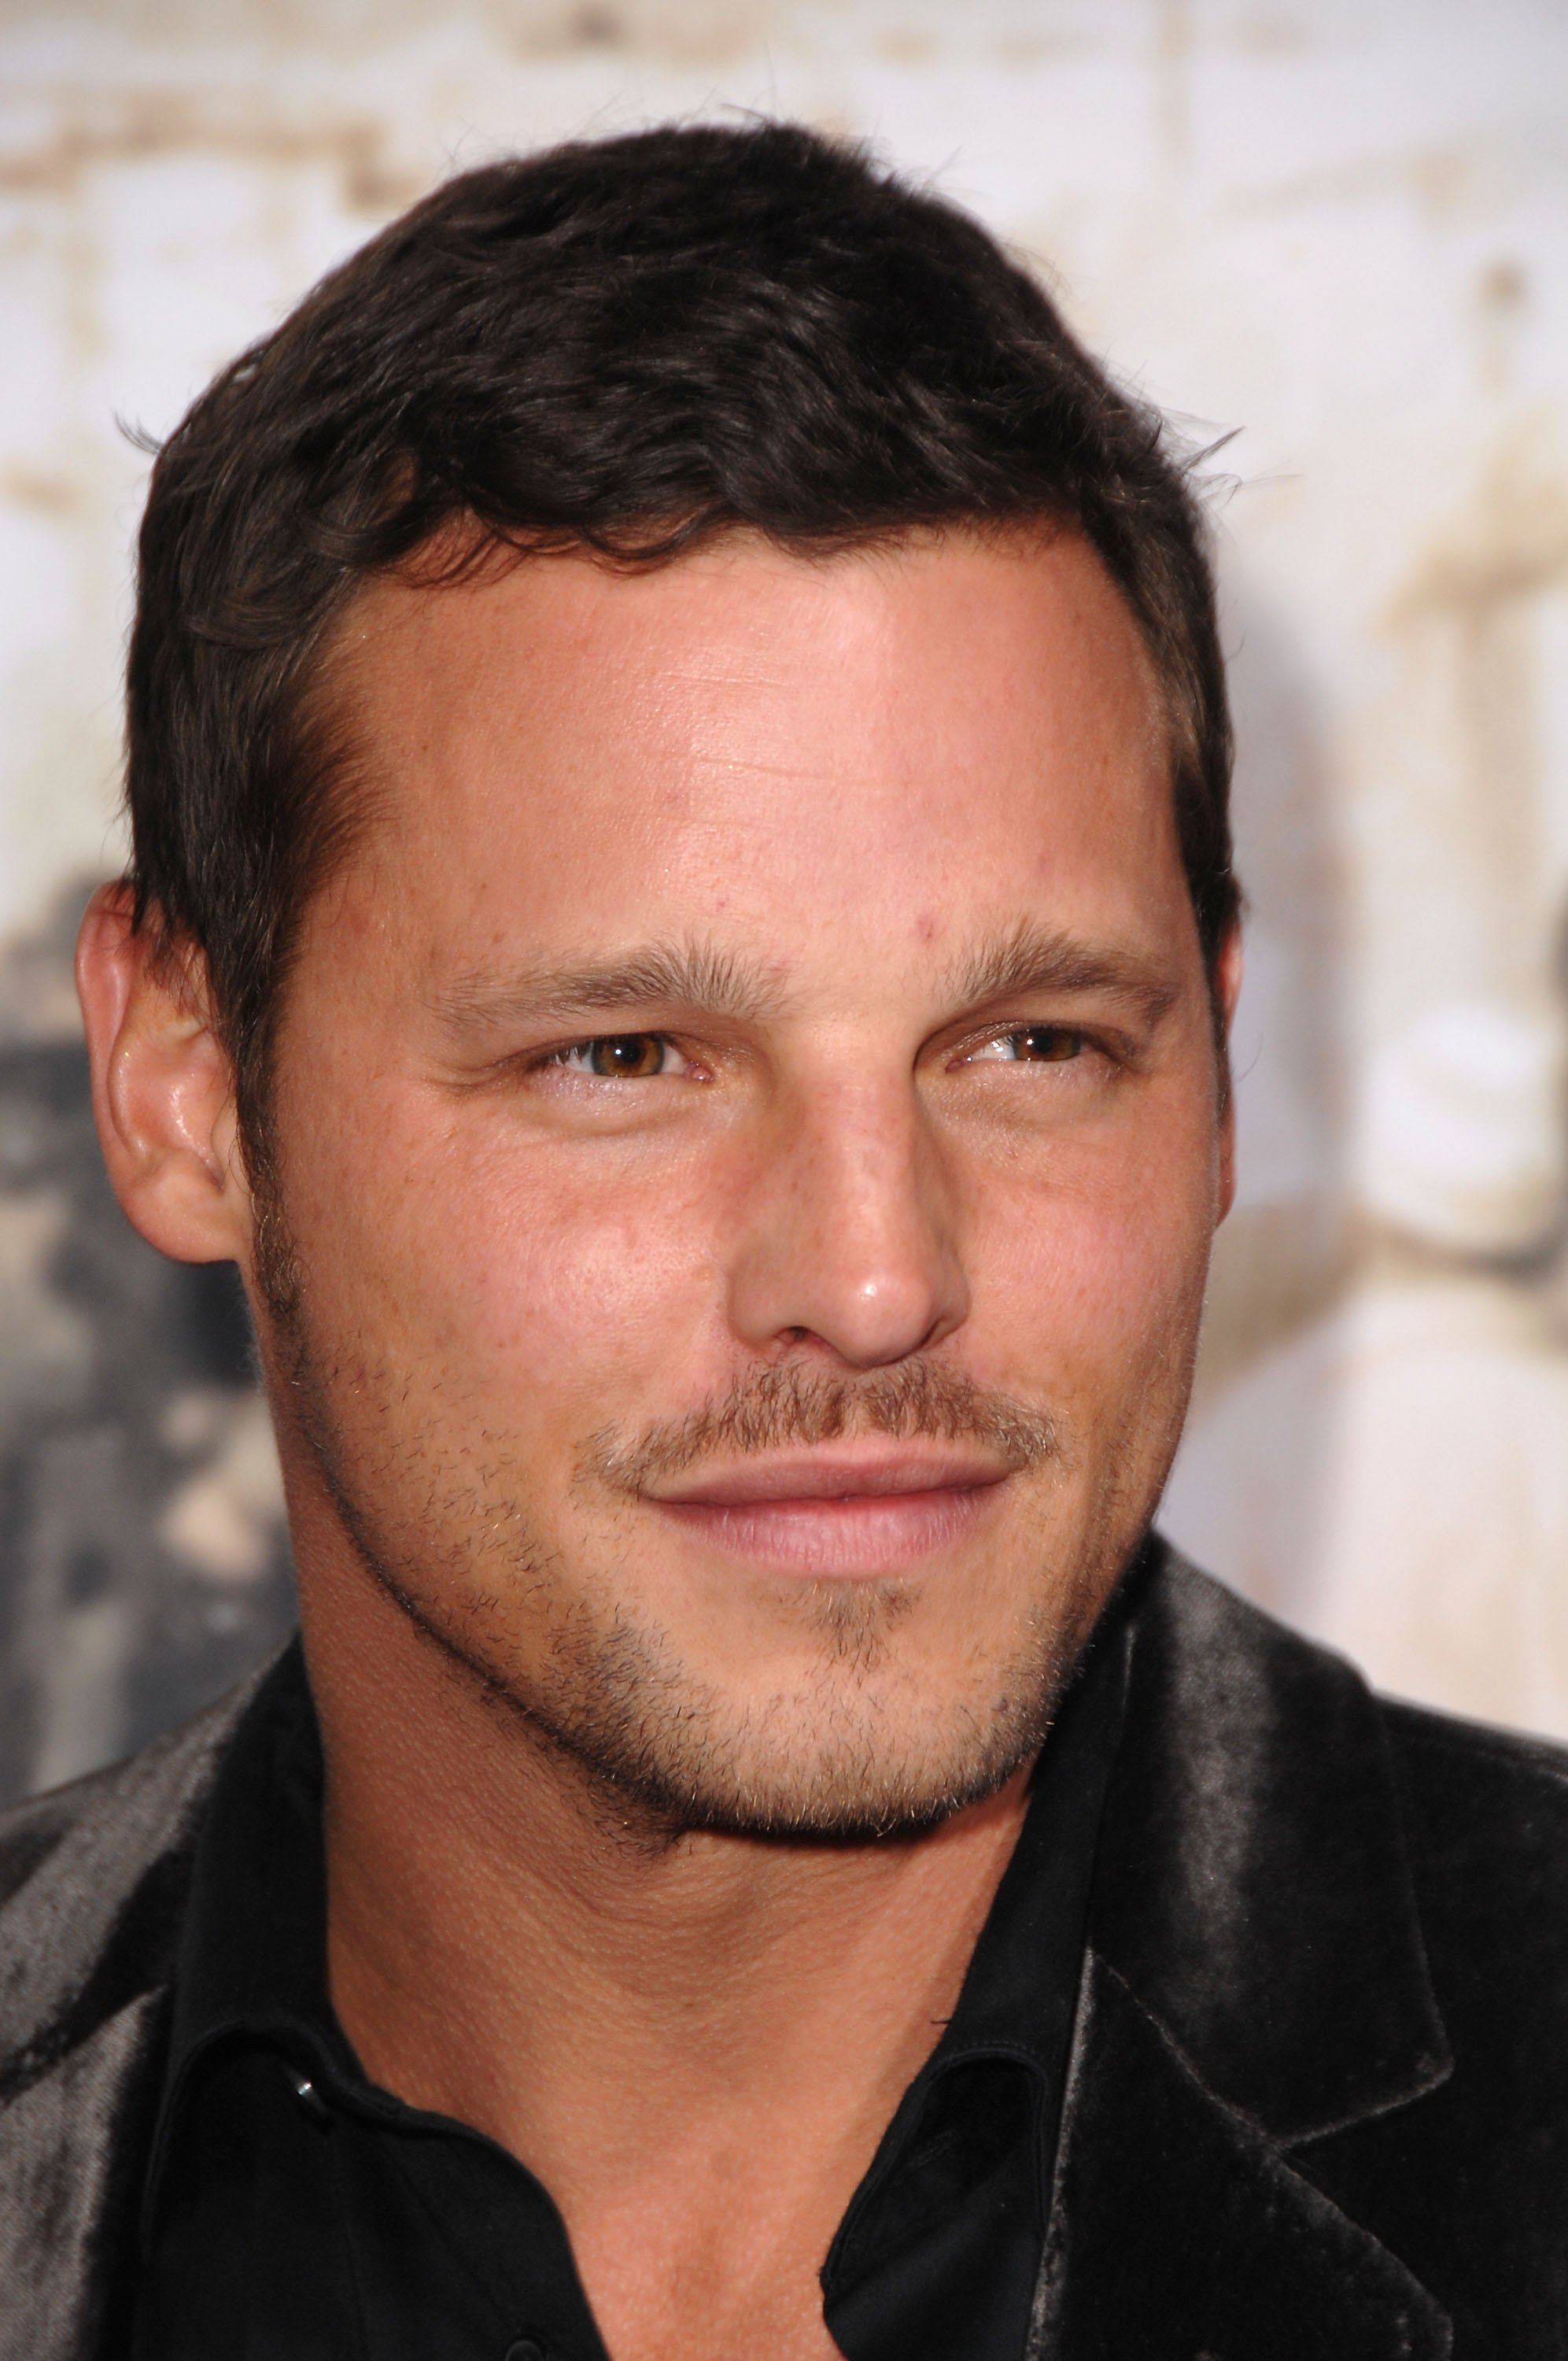 Actor Justin Chambers arrives to the premiere of "Rendition" at the Academy of Motion Pictures Arts and Sciences on October 10, 2007 |Photo: Getty images